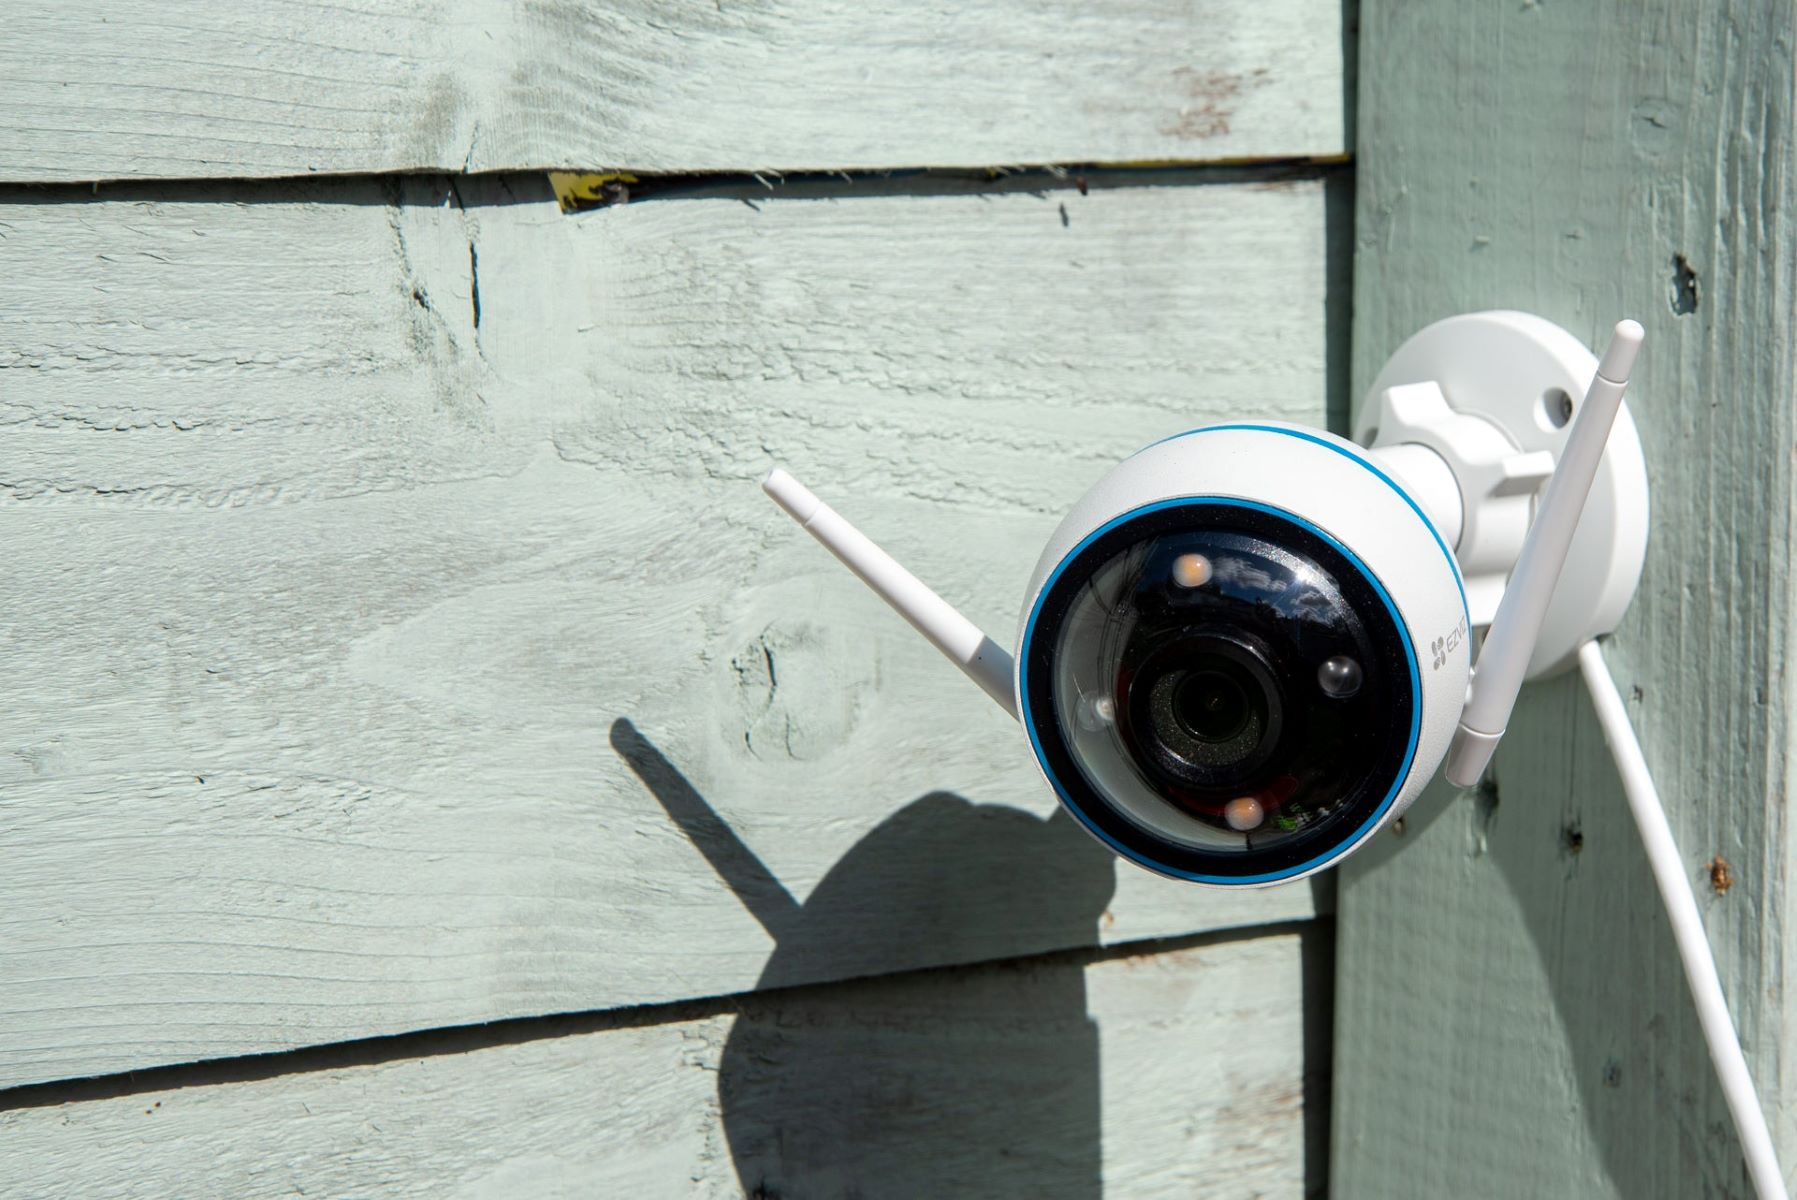 How To Live Stream Outdoor Camera Footage